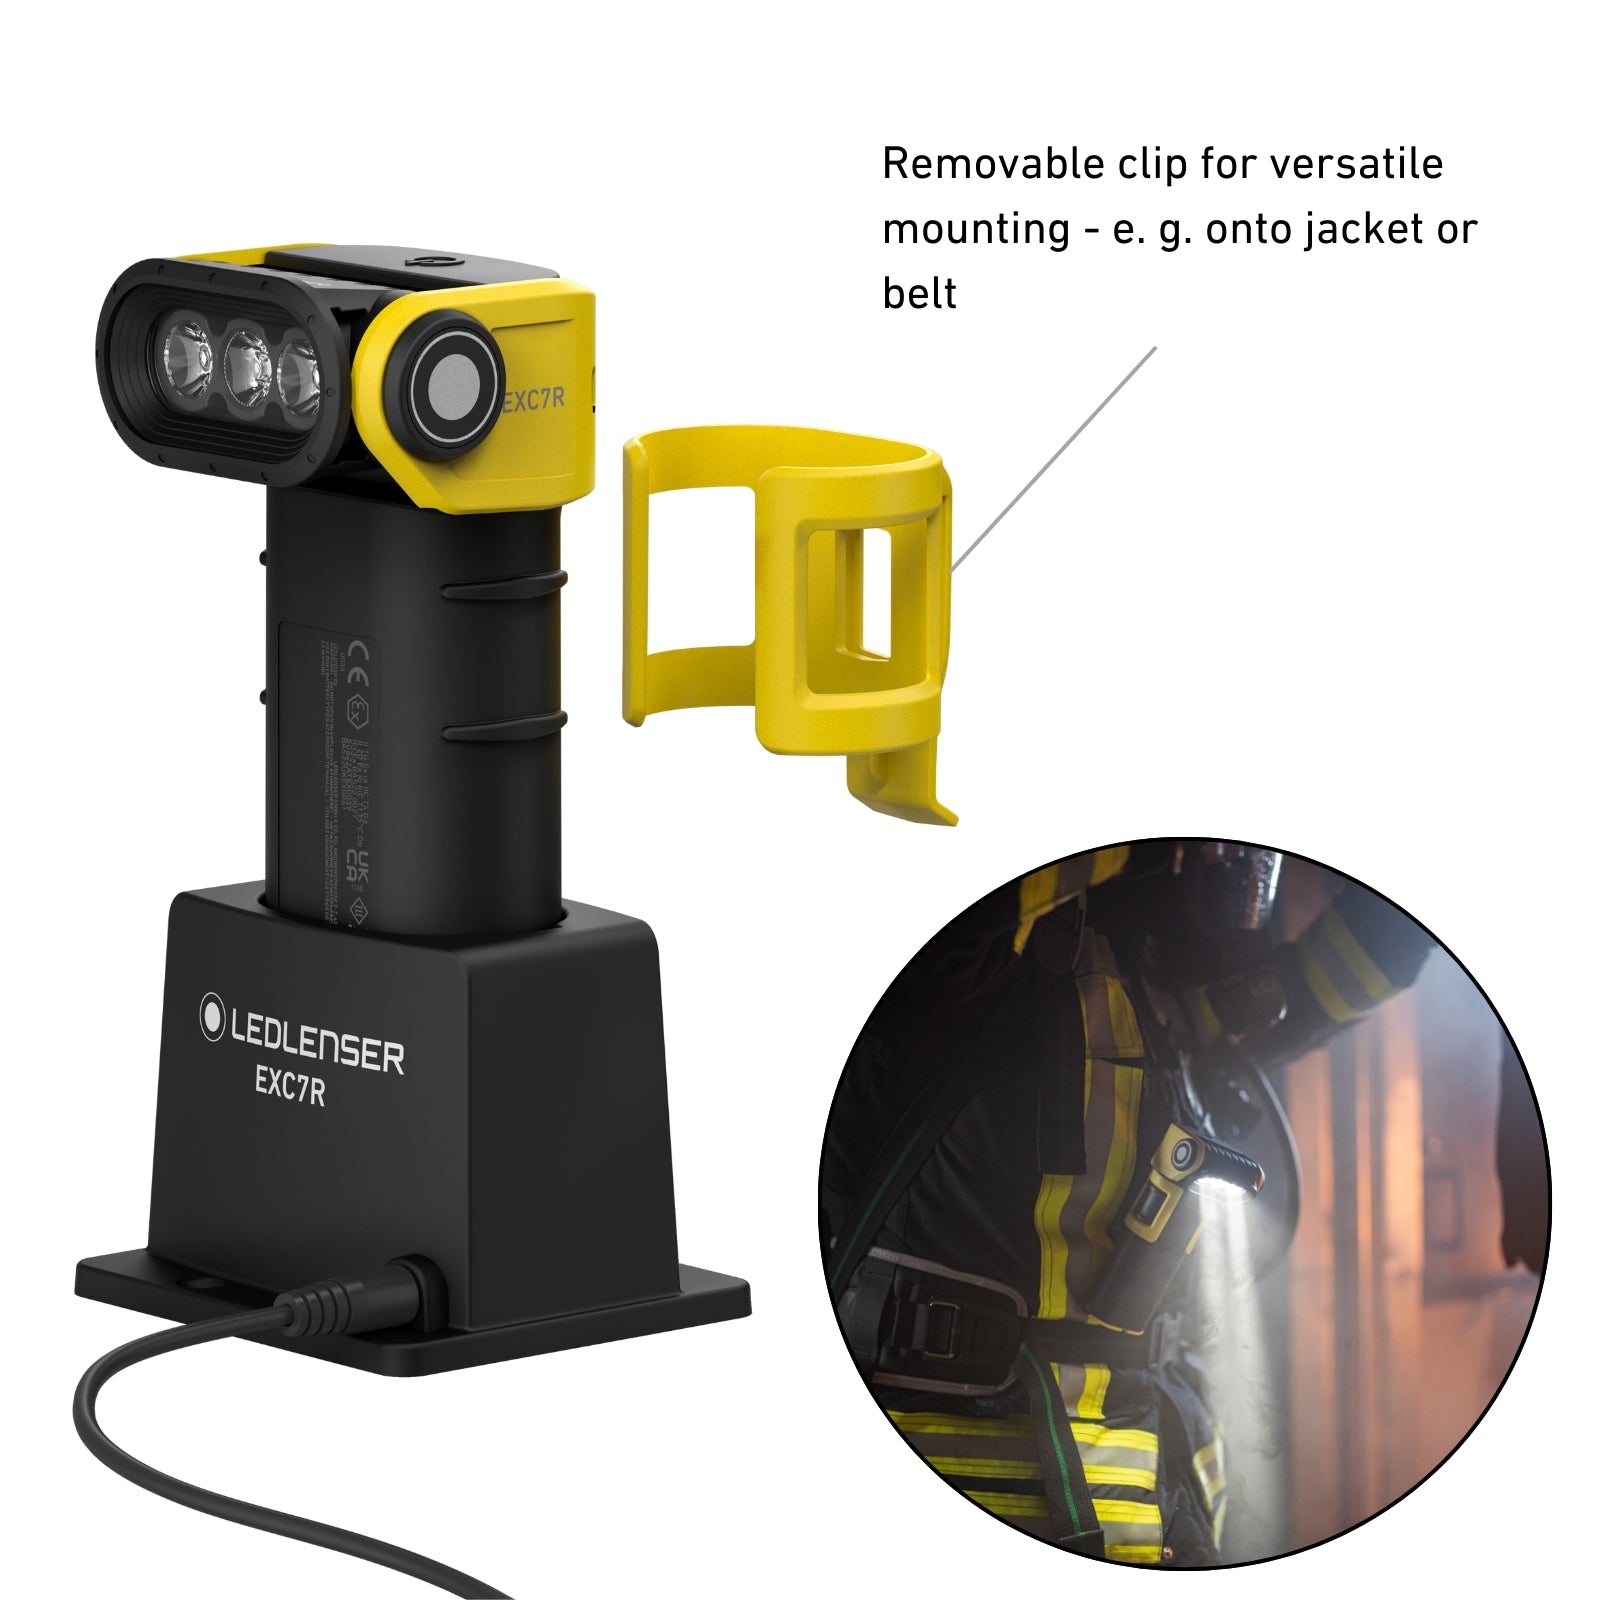 ATEX EXC7R Right Angle Rechargeable Torch Zone 0/21